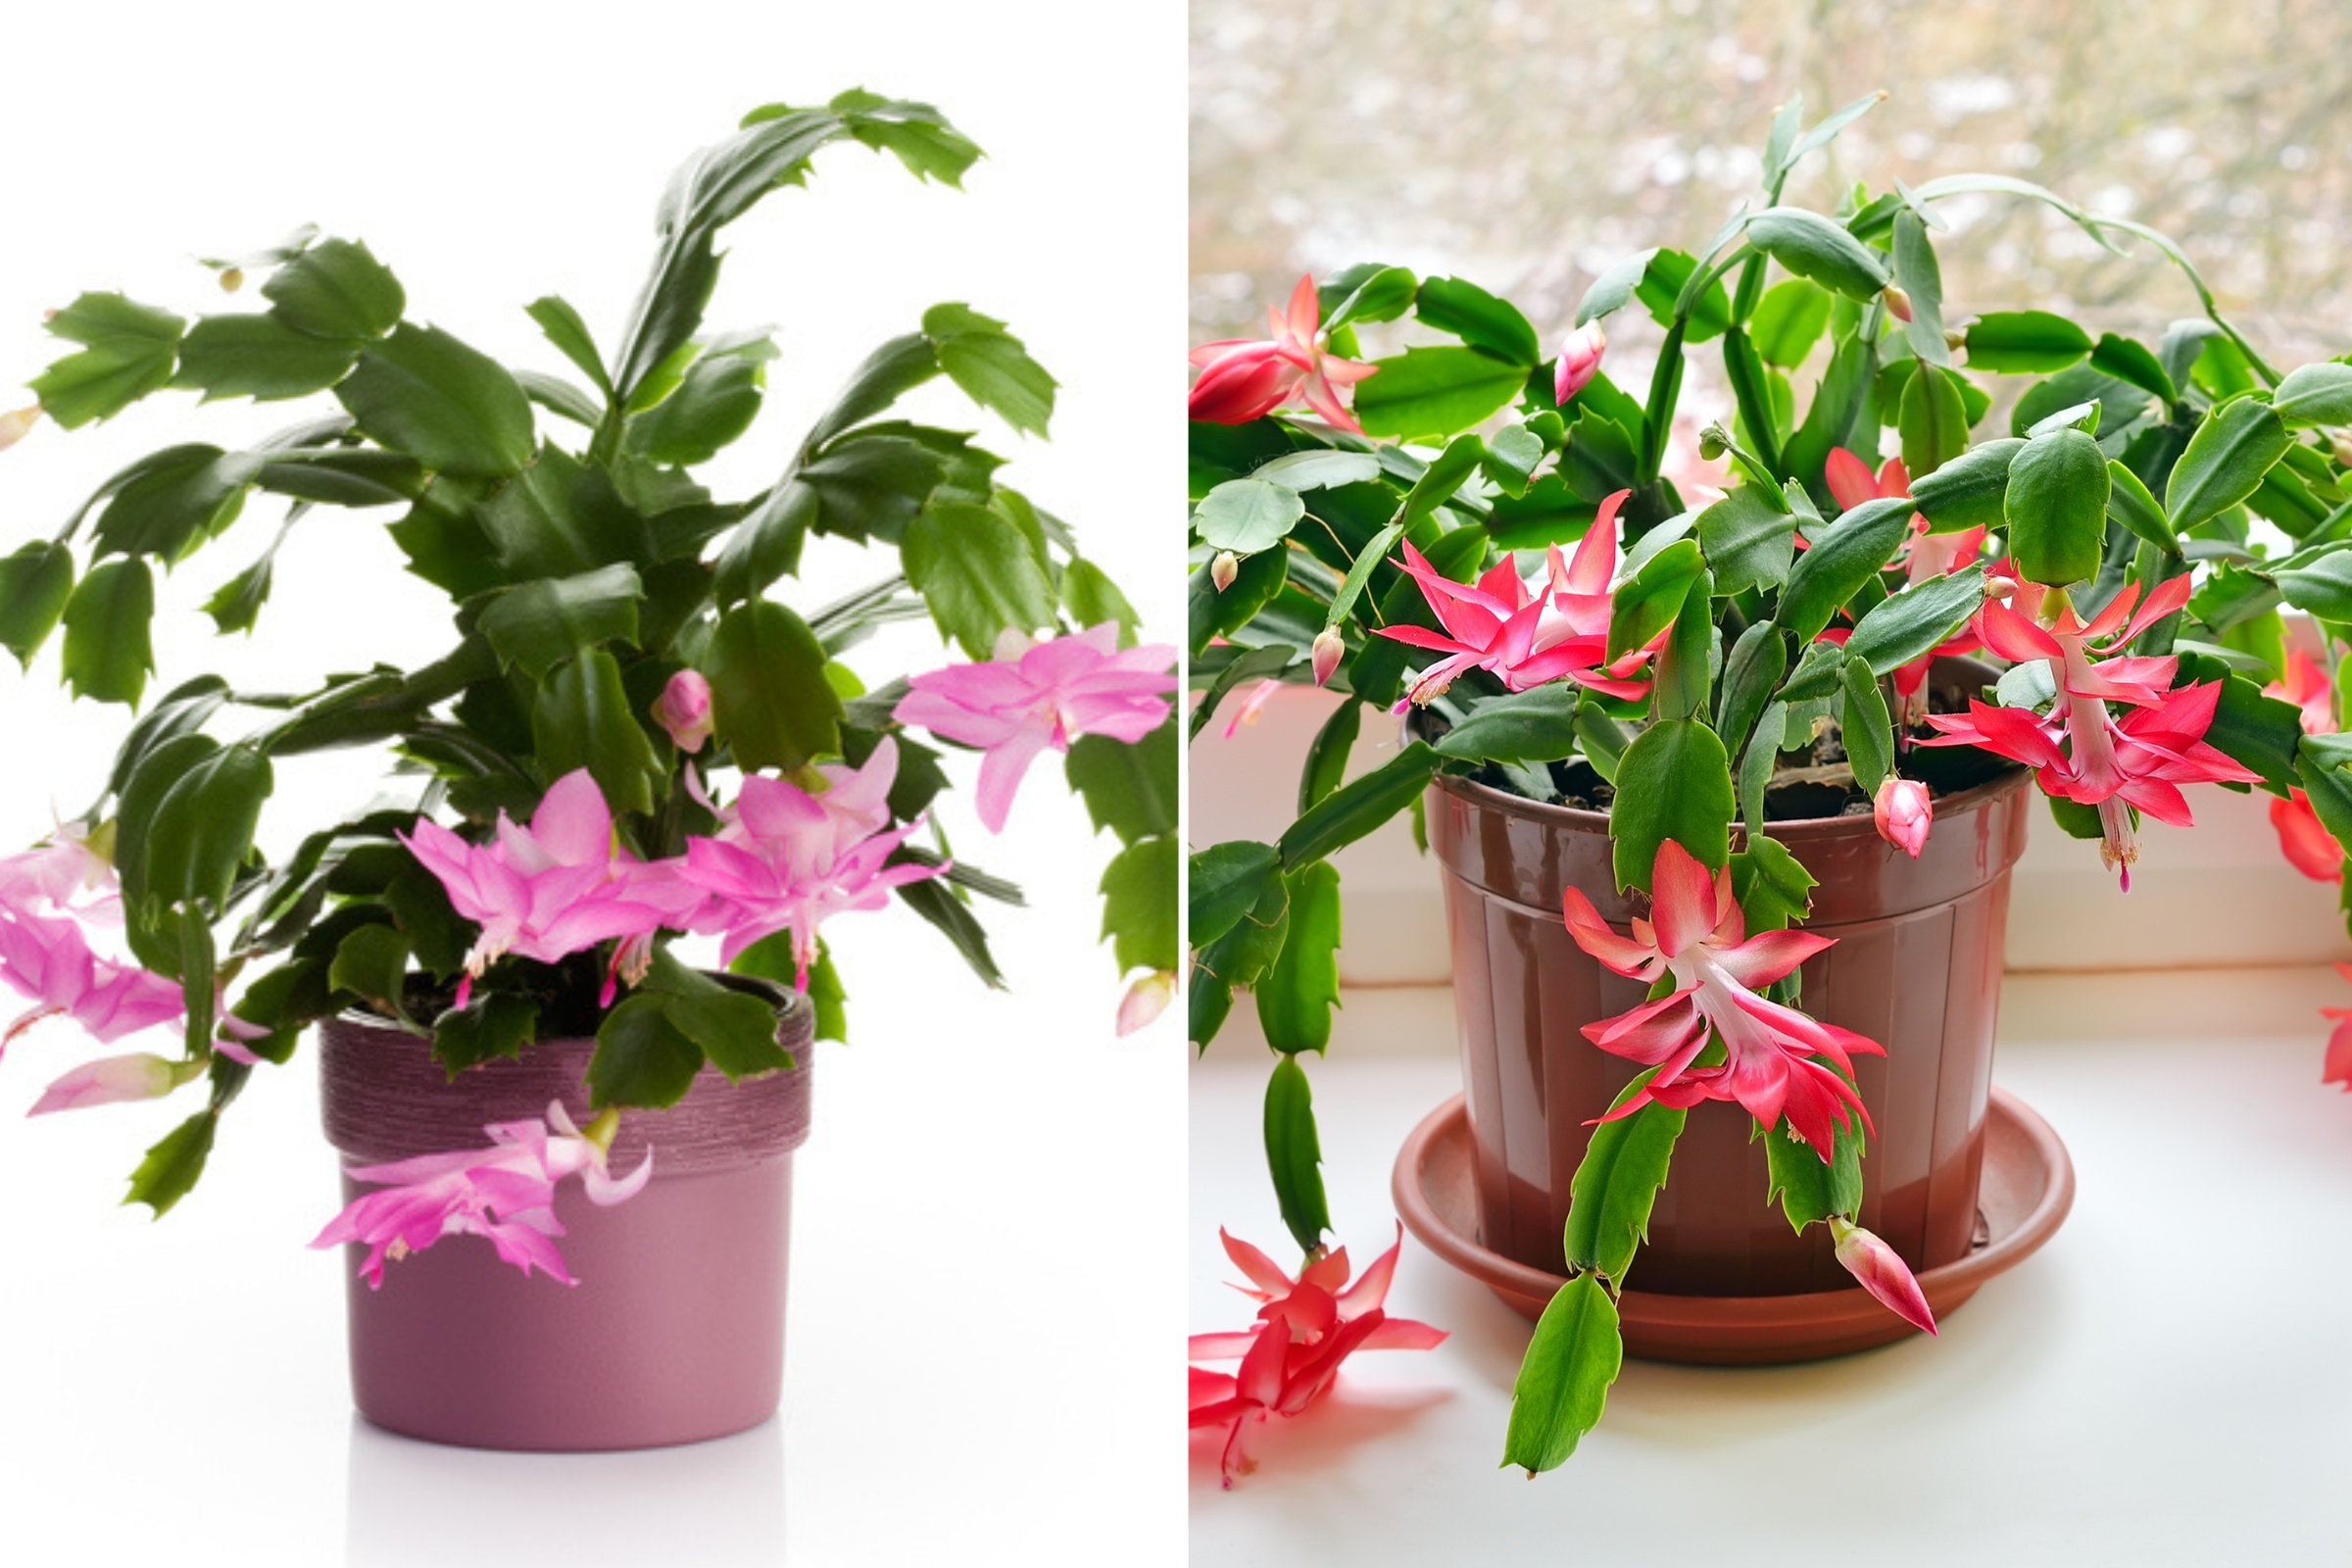 What is a Christmas cactus